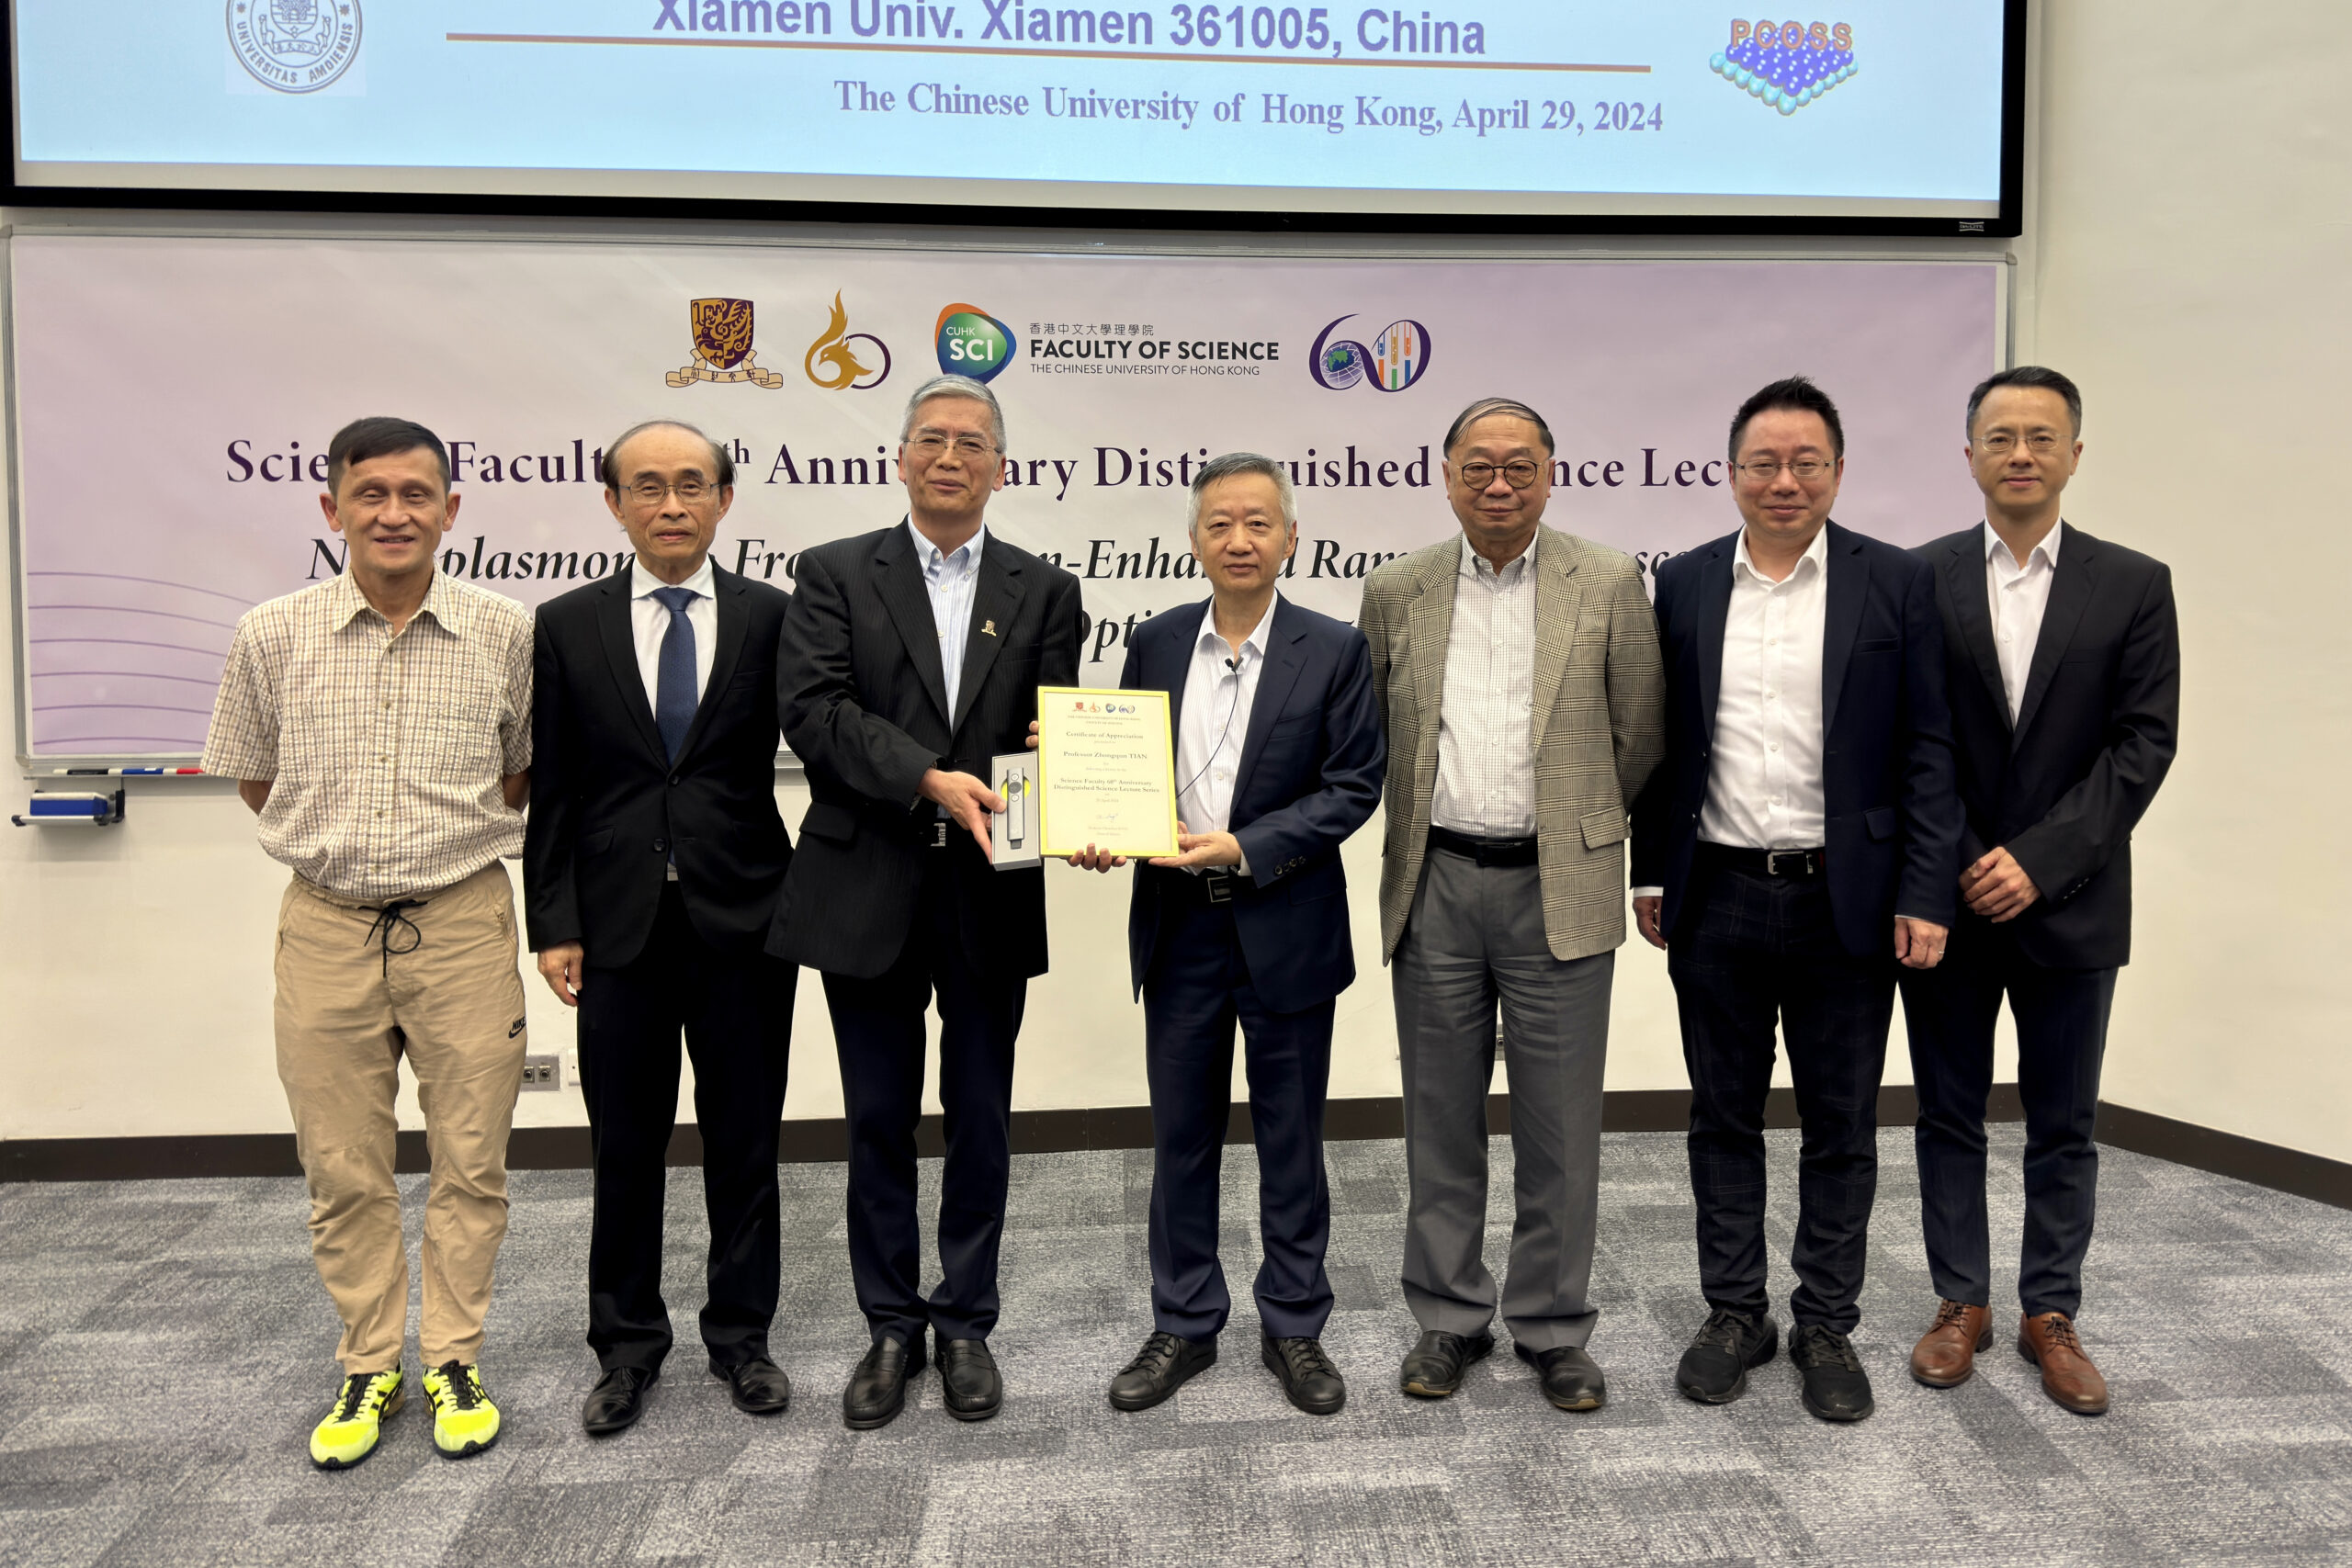 Professor LEE Ka Yee Christina of University of Chicago (2nd from left) received a certificate of appreciation and a souvenir from CUHK Science for her delivery of a Science Faculty 60th Anniversary Distinguished Science Lecture.